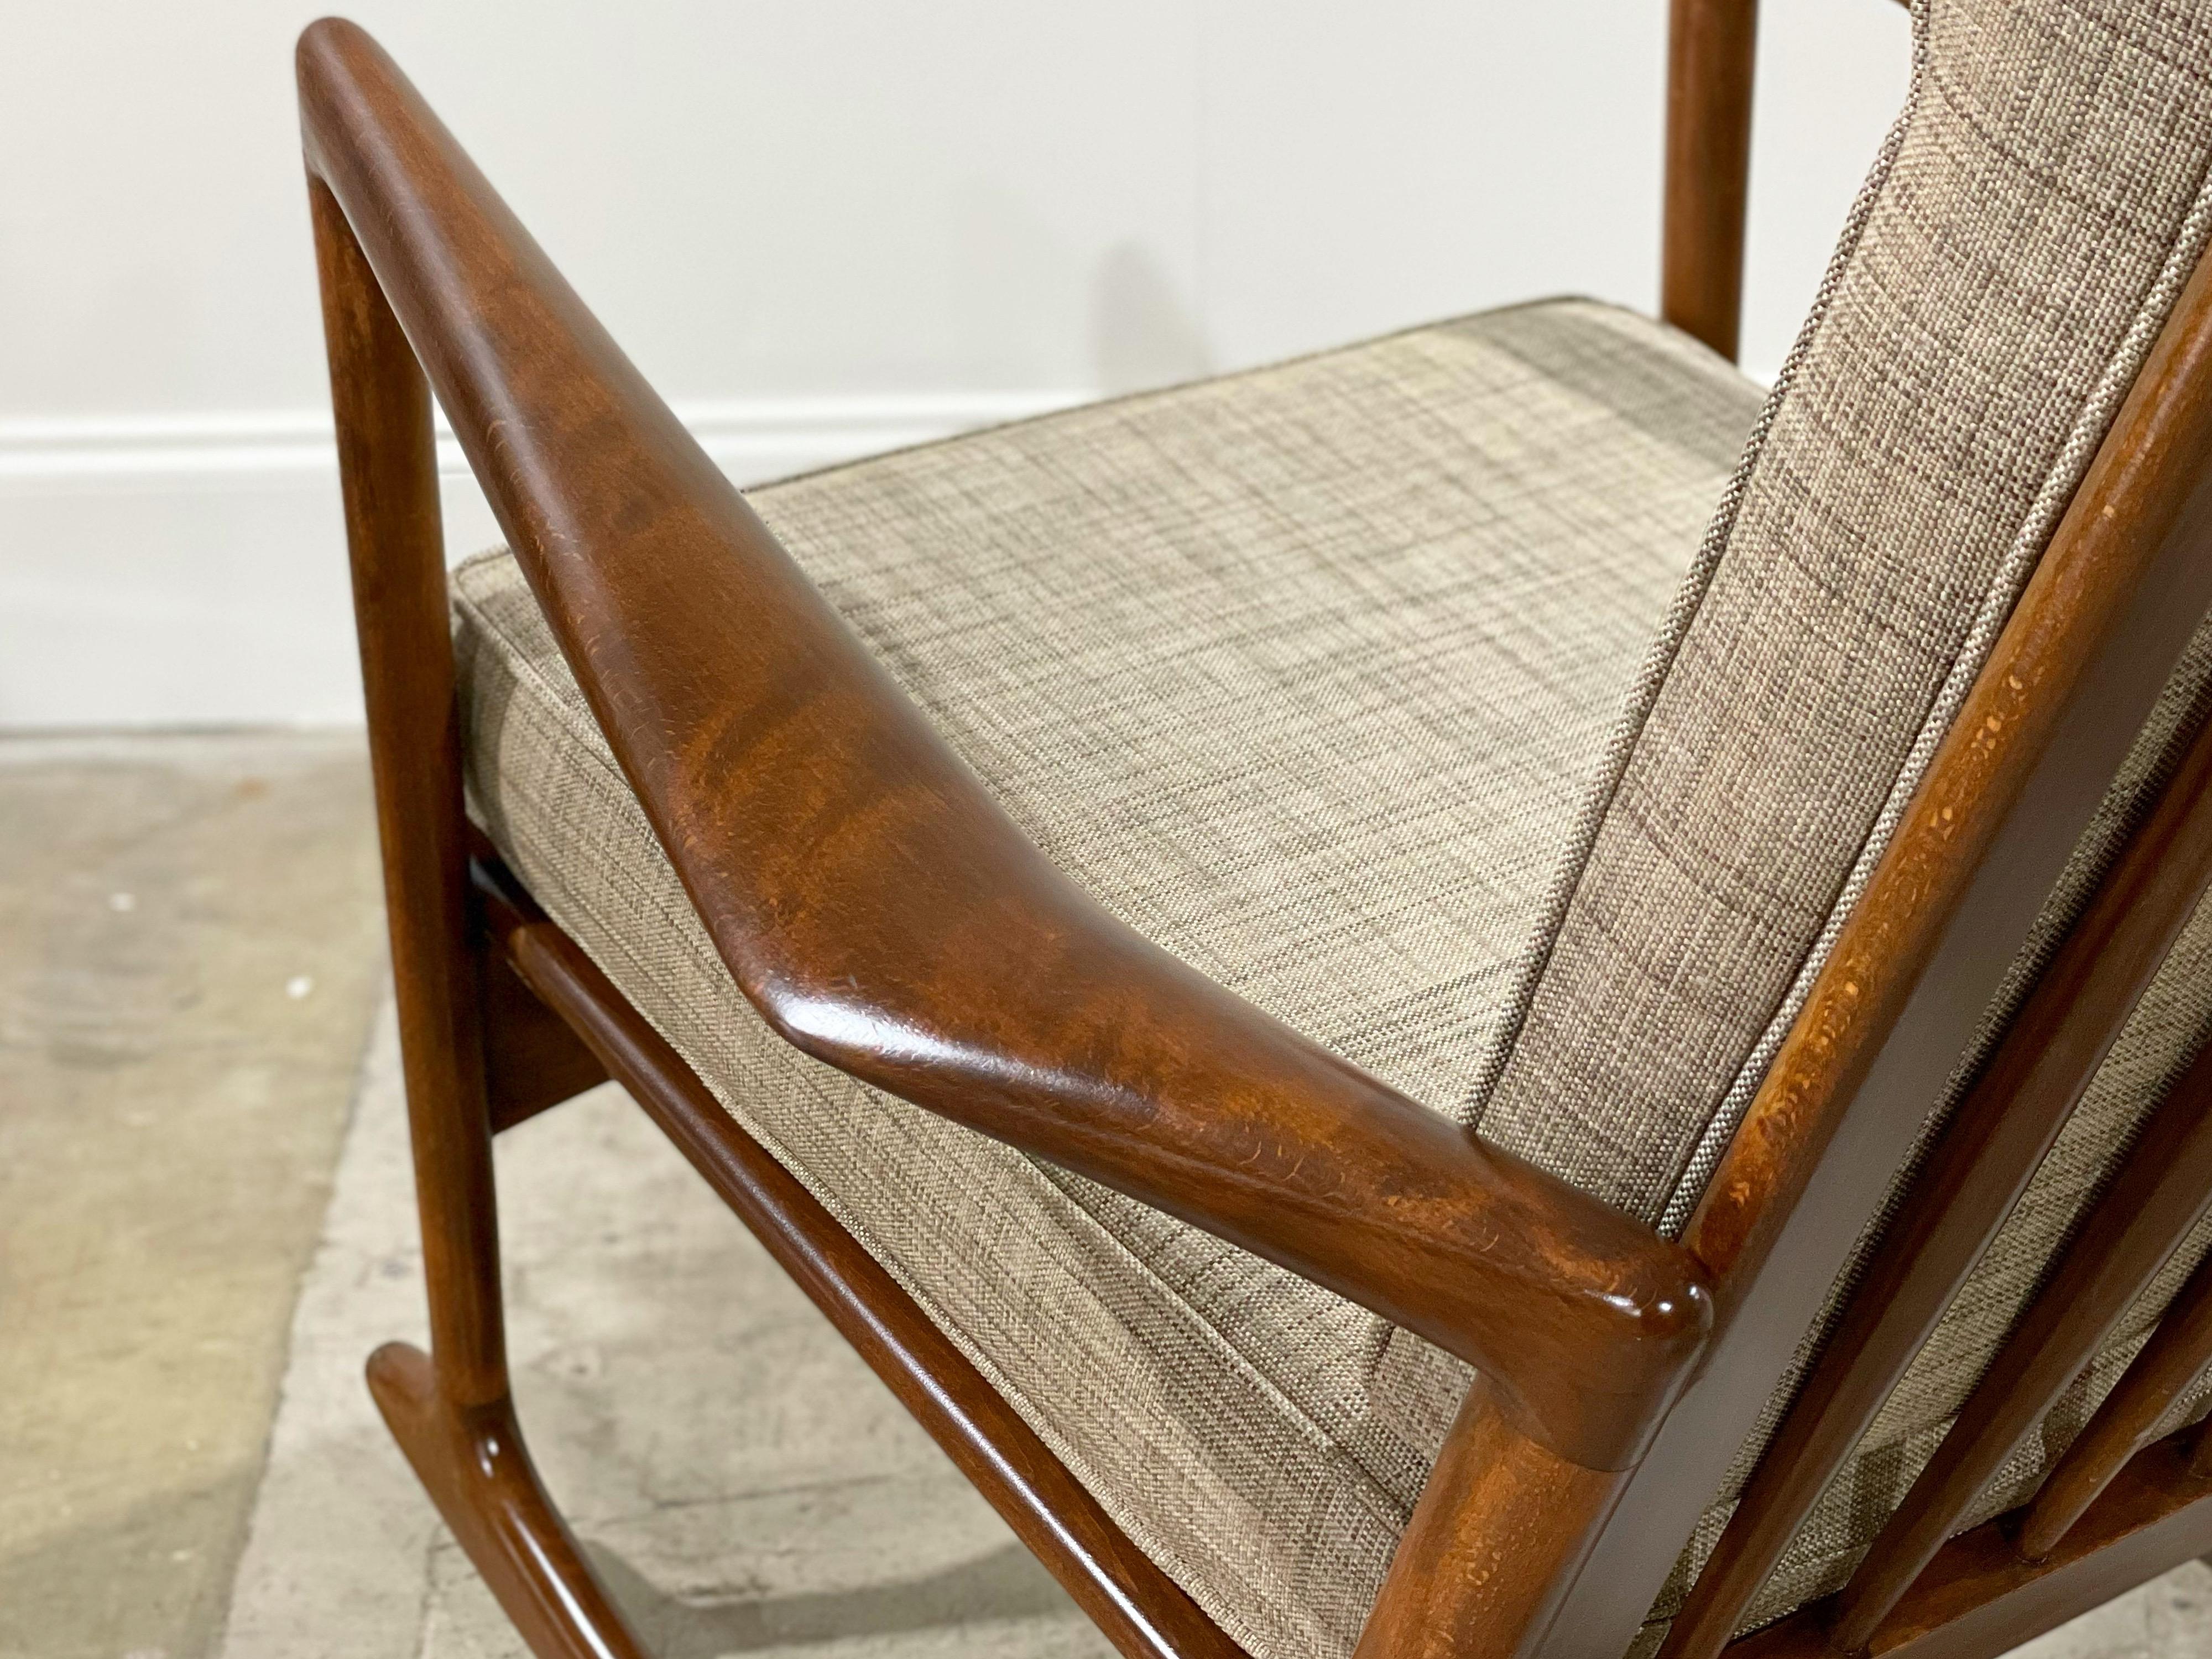 Iconic sculpted Mid-Century Modern rocking chair by Ib Kofod Larsen for Selig. A remarkable example of one of Larsen's best designs. Sculpted walnut stained solid beechwood frame is immaculate - finished in a gorgeous semigloss lacquer. Freshly